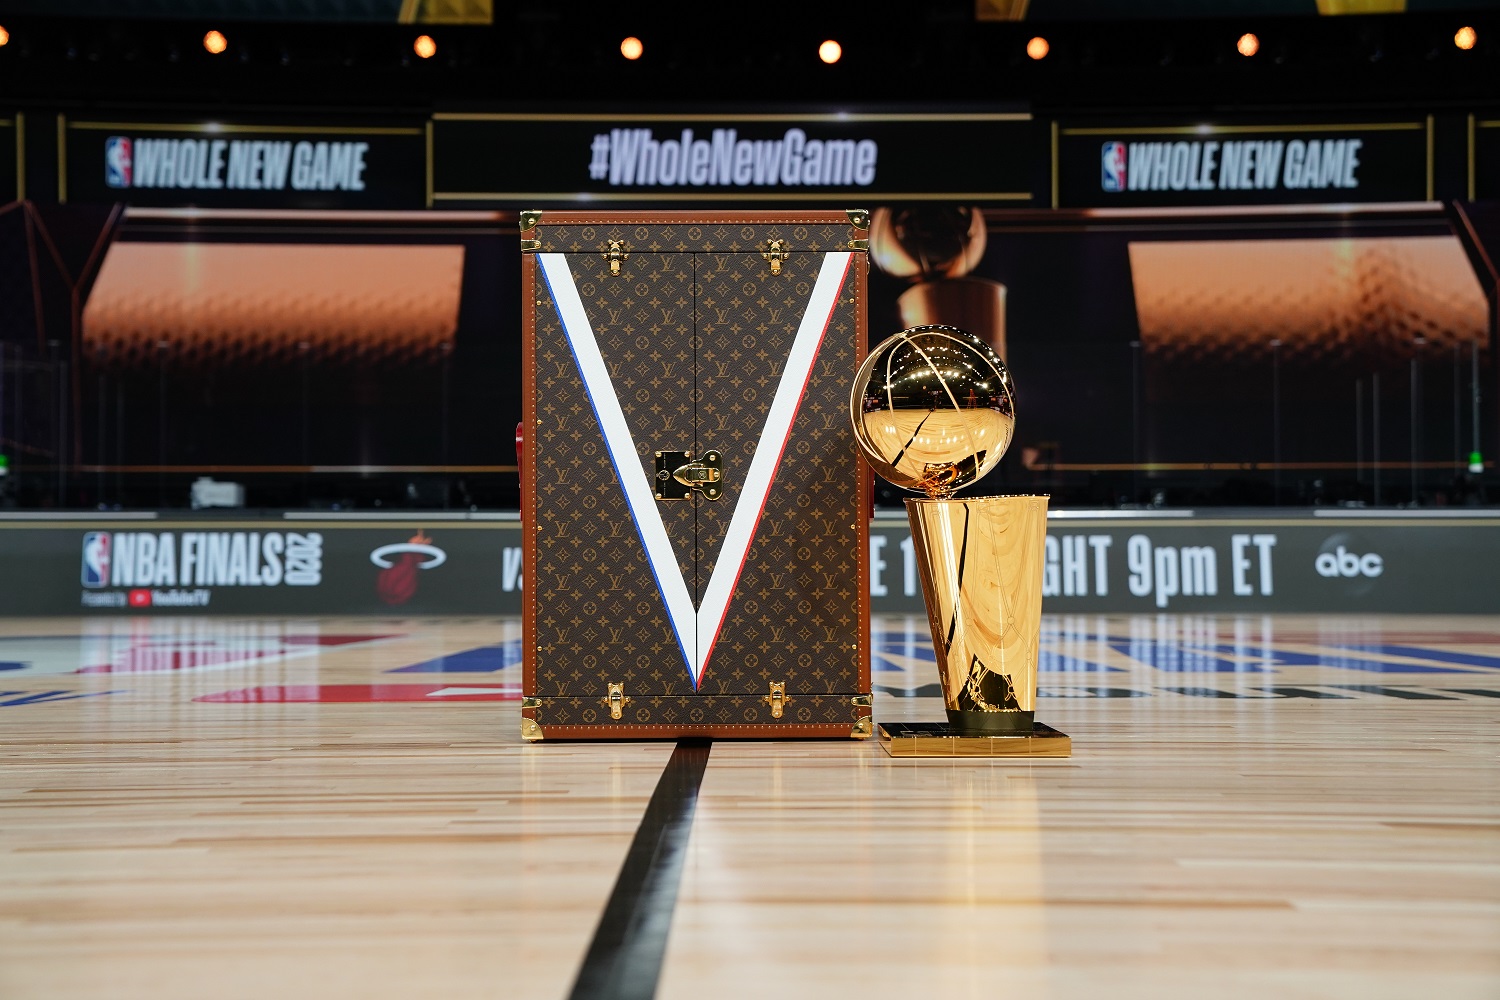 ORLANDO, FL - SEPTEMBER 30: A portrait of the Larry O'Brien Championship Trophy along with the Louis Vuitton Travel Case prior to Game one of the 2020 NBA Finals as part of the NBA Restart 2020 on September 30, 2020 at AdventHealth Arena at ESPN Wide World of Sports Complex in Orlando, Florida. NOTE TO USER: User expressly acknowledges and agrees that, by downloading and/or using this photograph, user is consenting to the terms and conditions of the Getty Images License Agreement.  Mandatory Copyright Notice: Copyright 2020 NBAE (Photo by Jesse D. Garrabrant/NBAE via Getty Images)